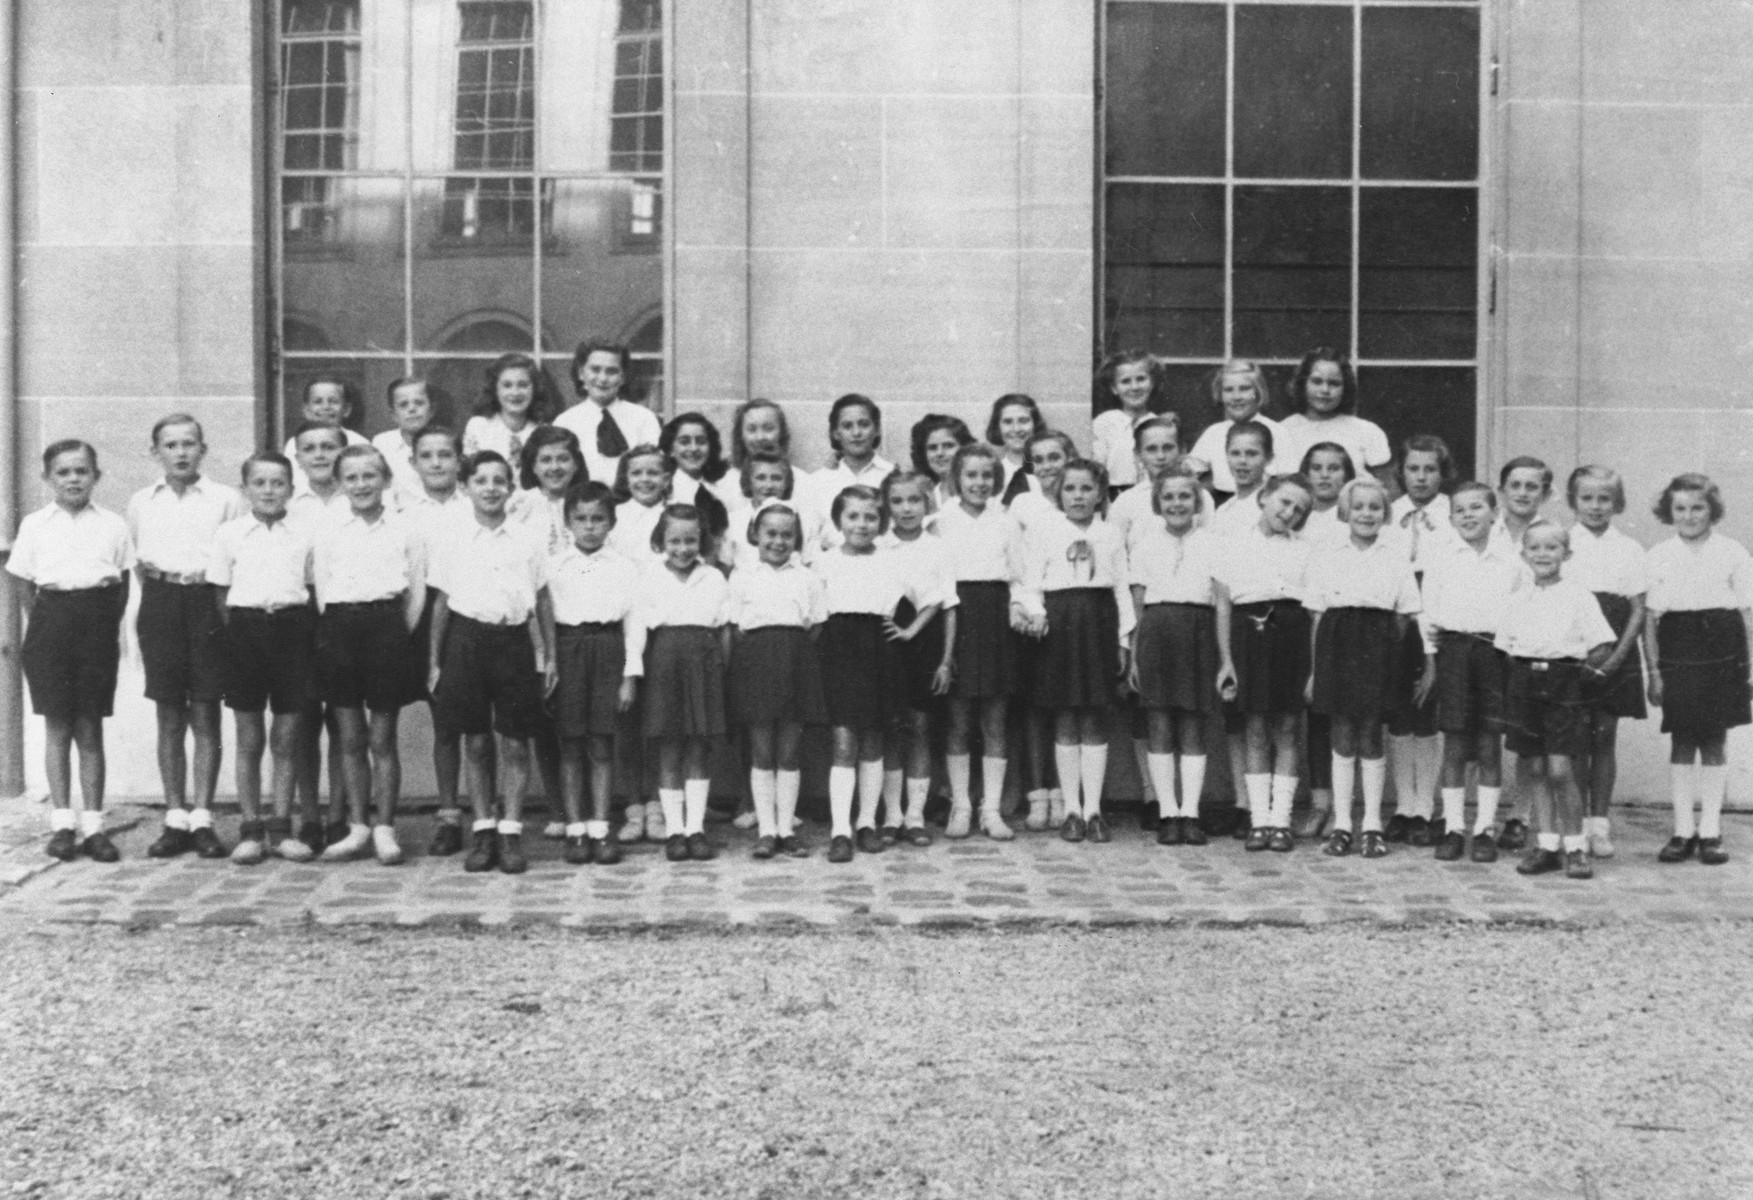 Members of the MACE (Masion d'Accueil Chretienne pour Enfants) children's choir, many of whom had been in hiding during the war.

Those pictured include Helene Reichenberg, Isabelle Reichl and Marthe Levai.